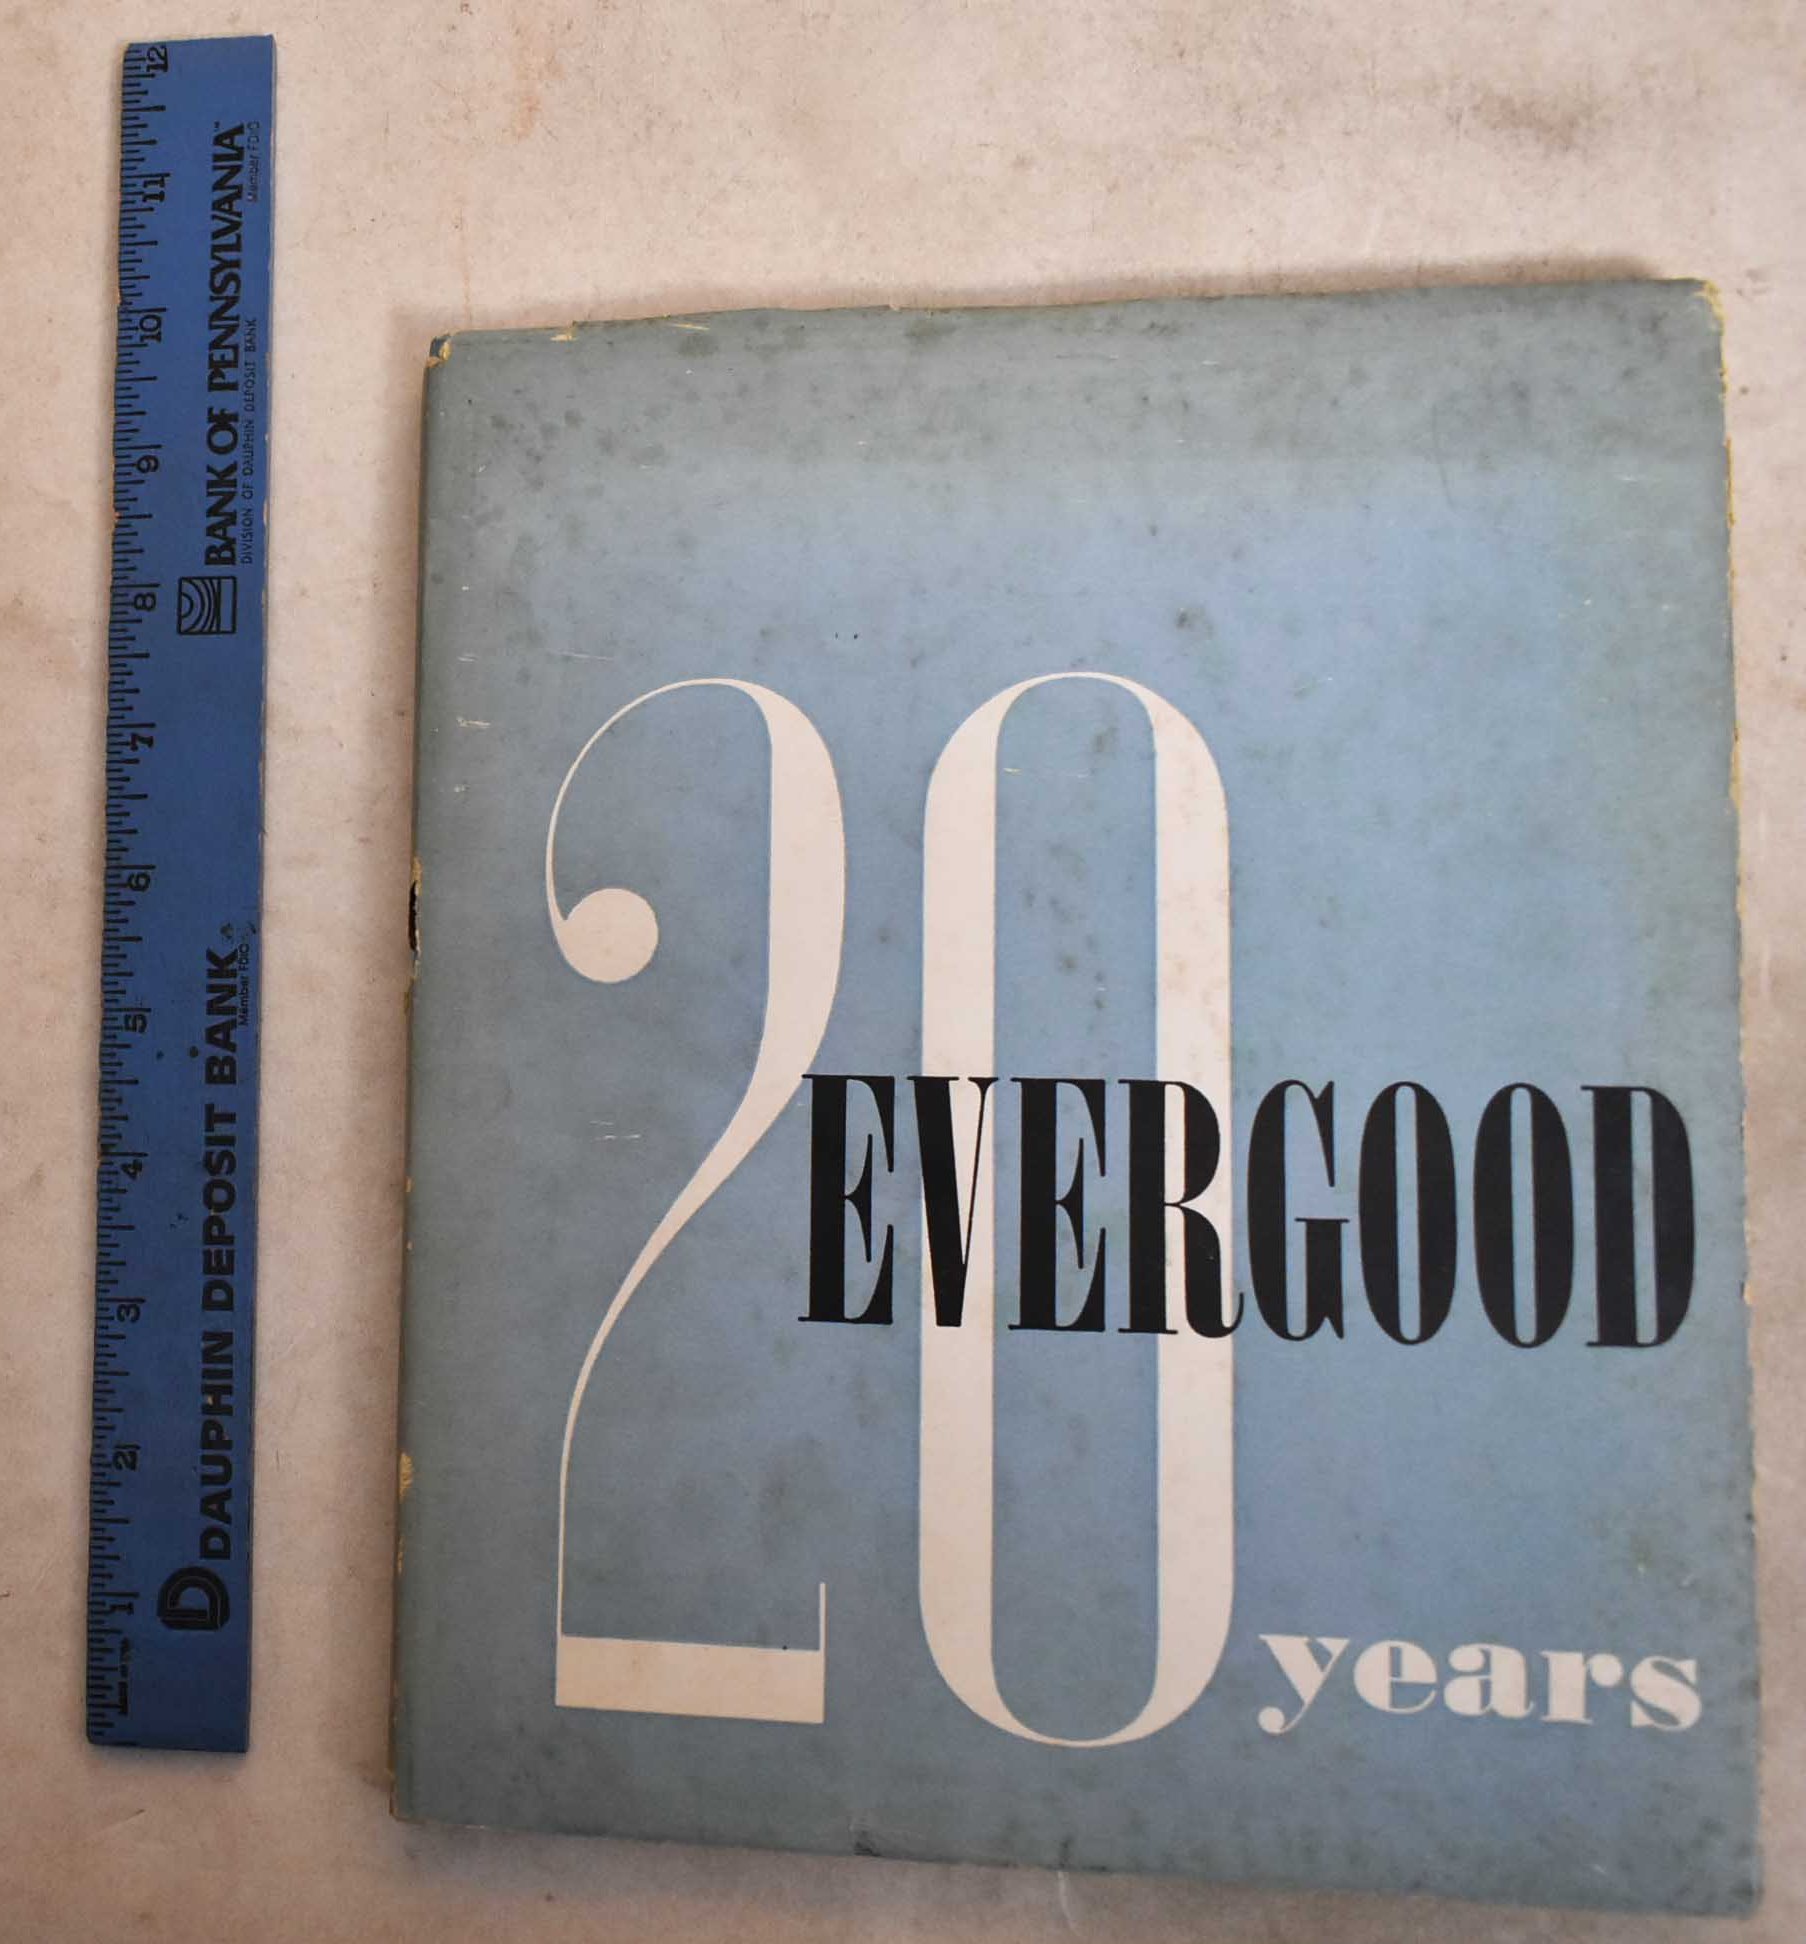 20 Years, Evergood by Evergood, Philip: Hardcover (1946) signed copy ...